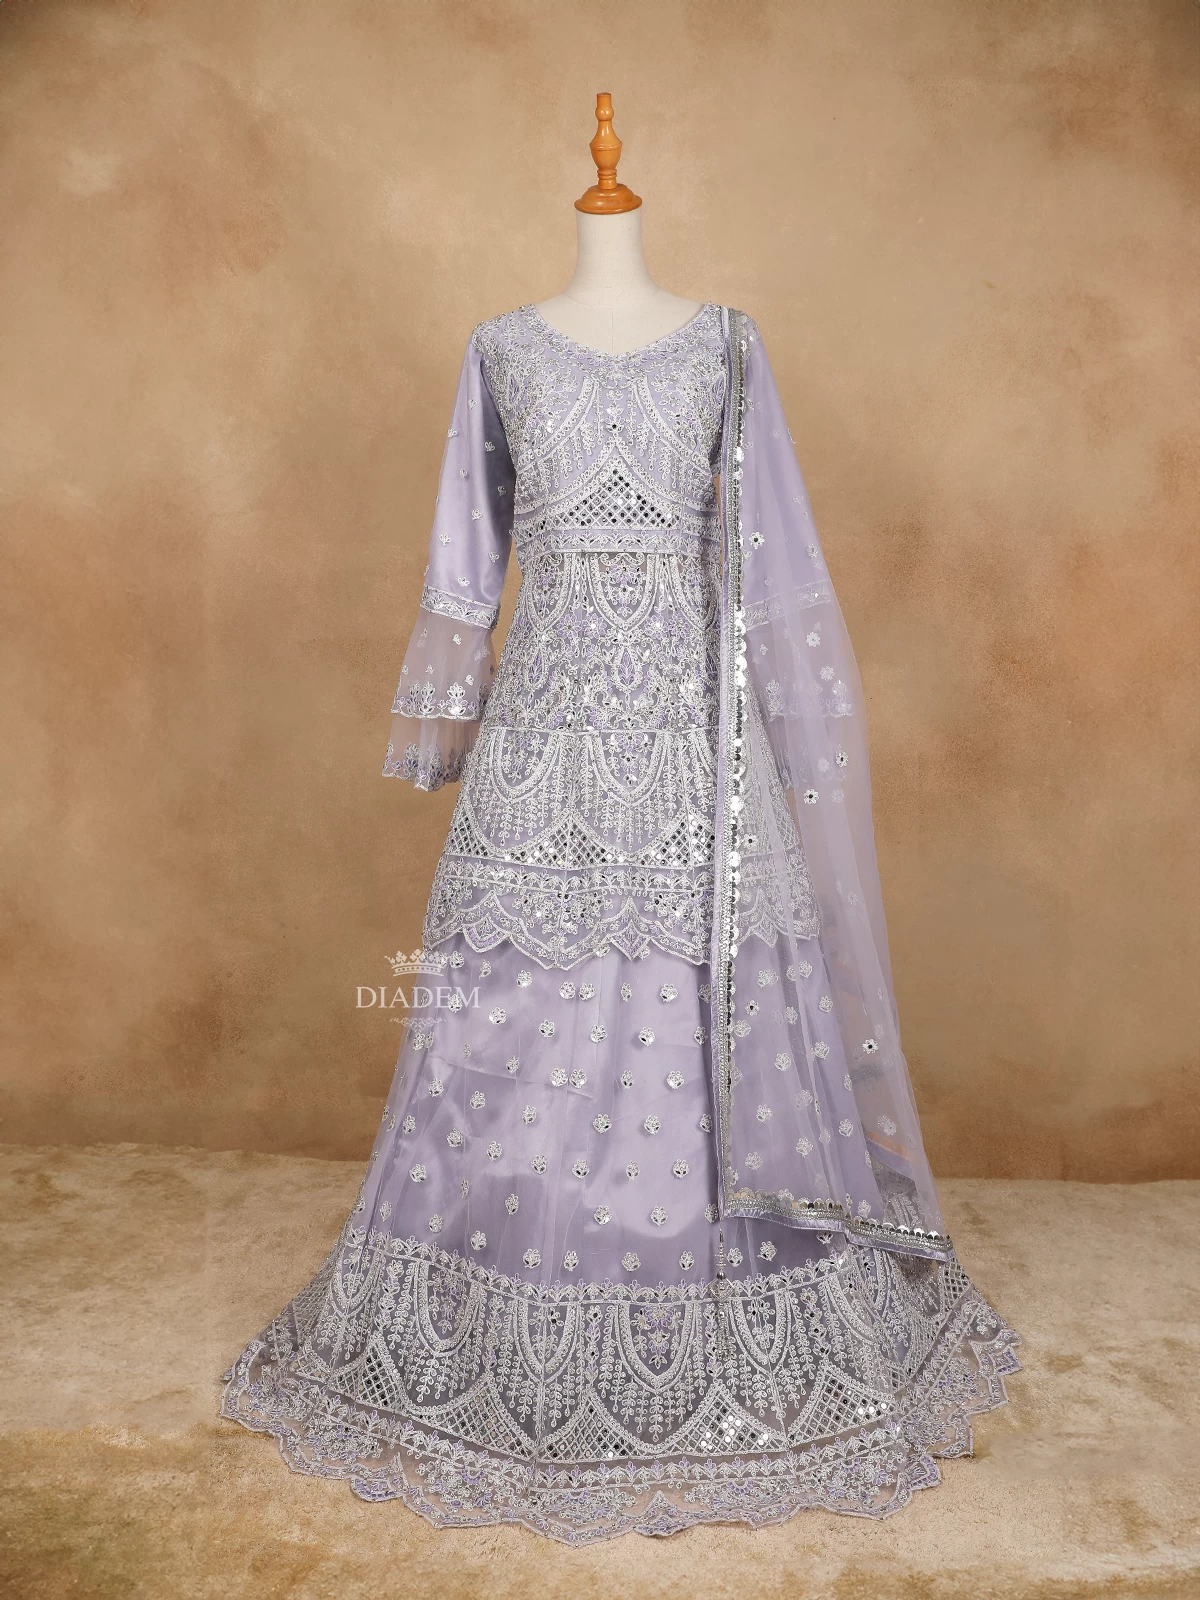 Lavender Net Lehenga Embellished with Threadwork Embroidery Paired with Matching Net Dupatta